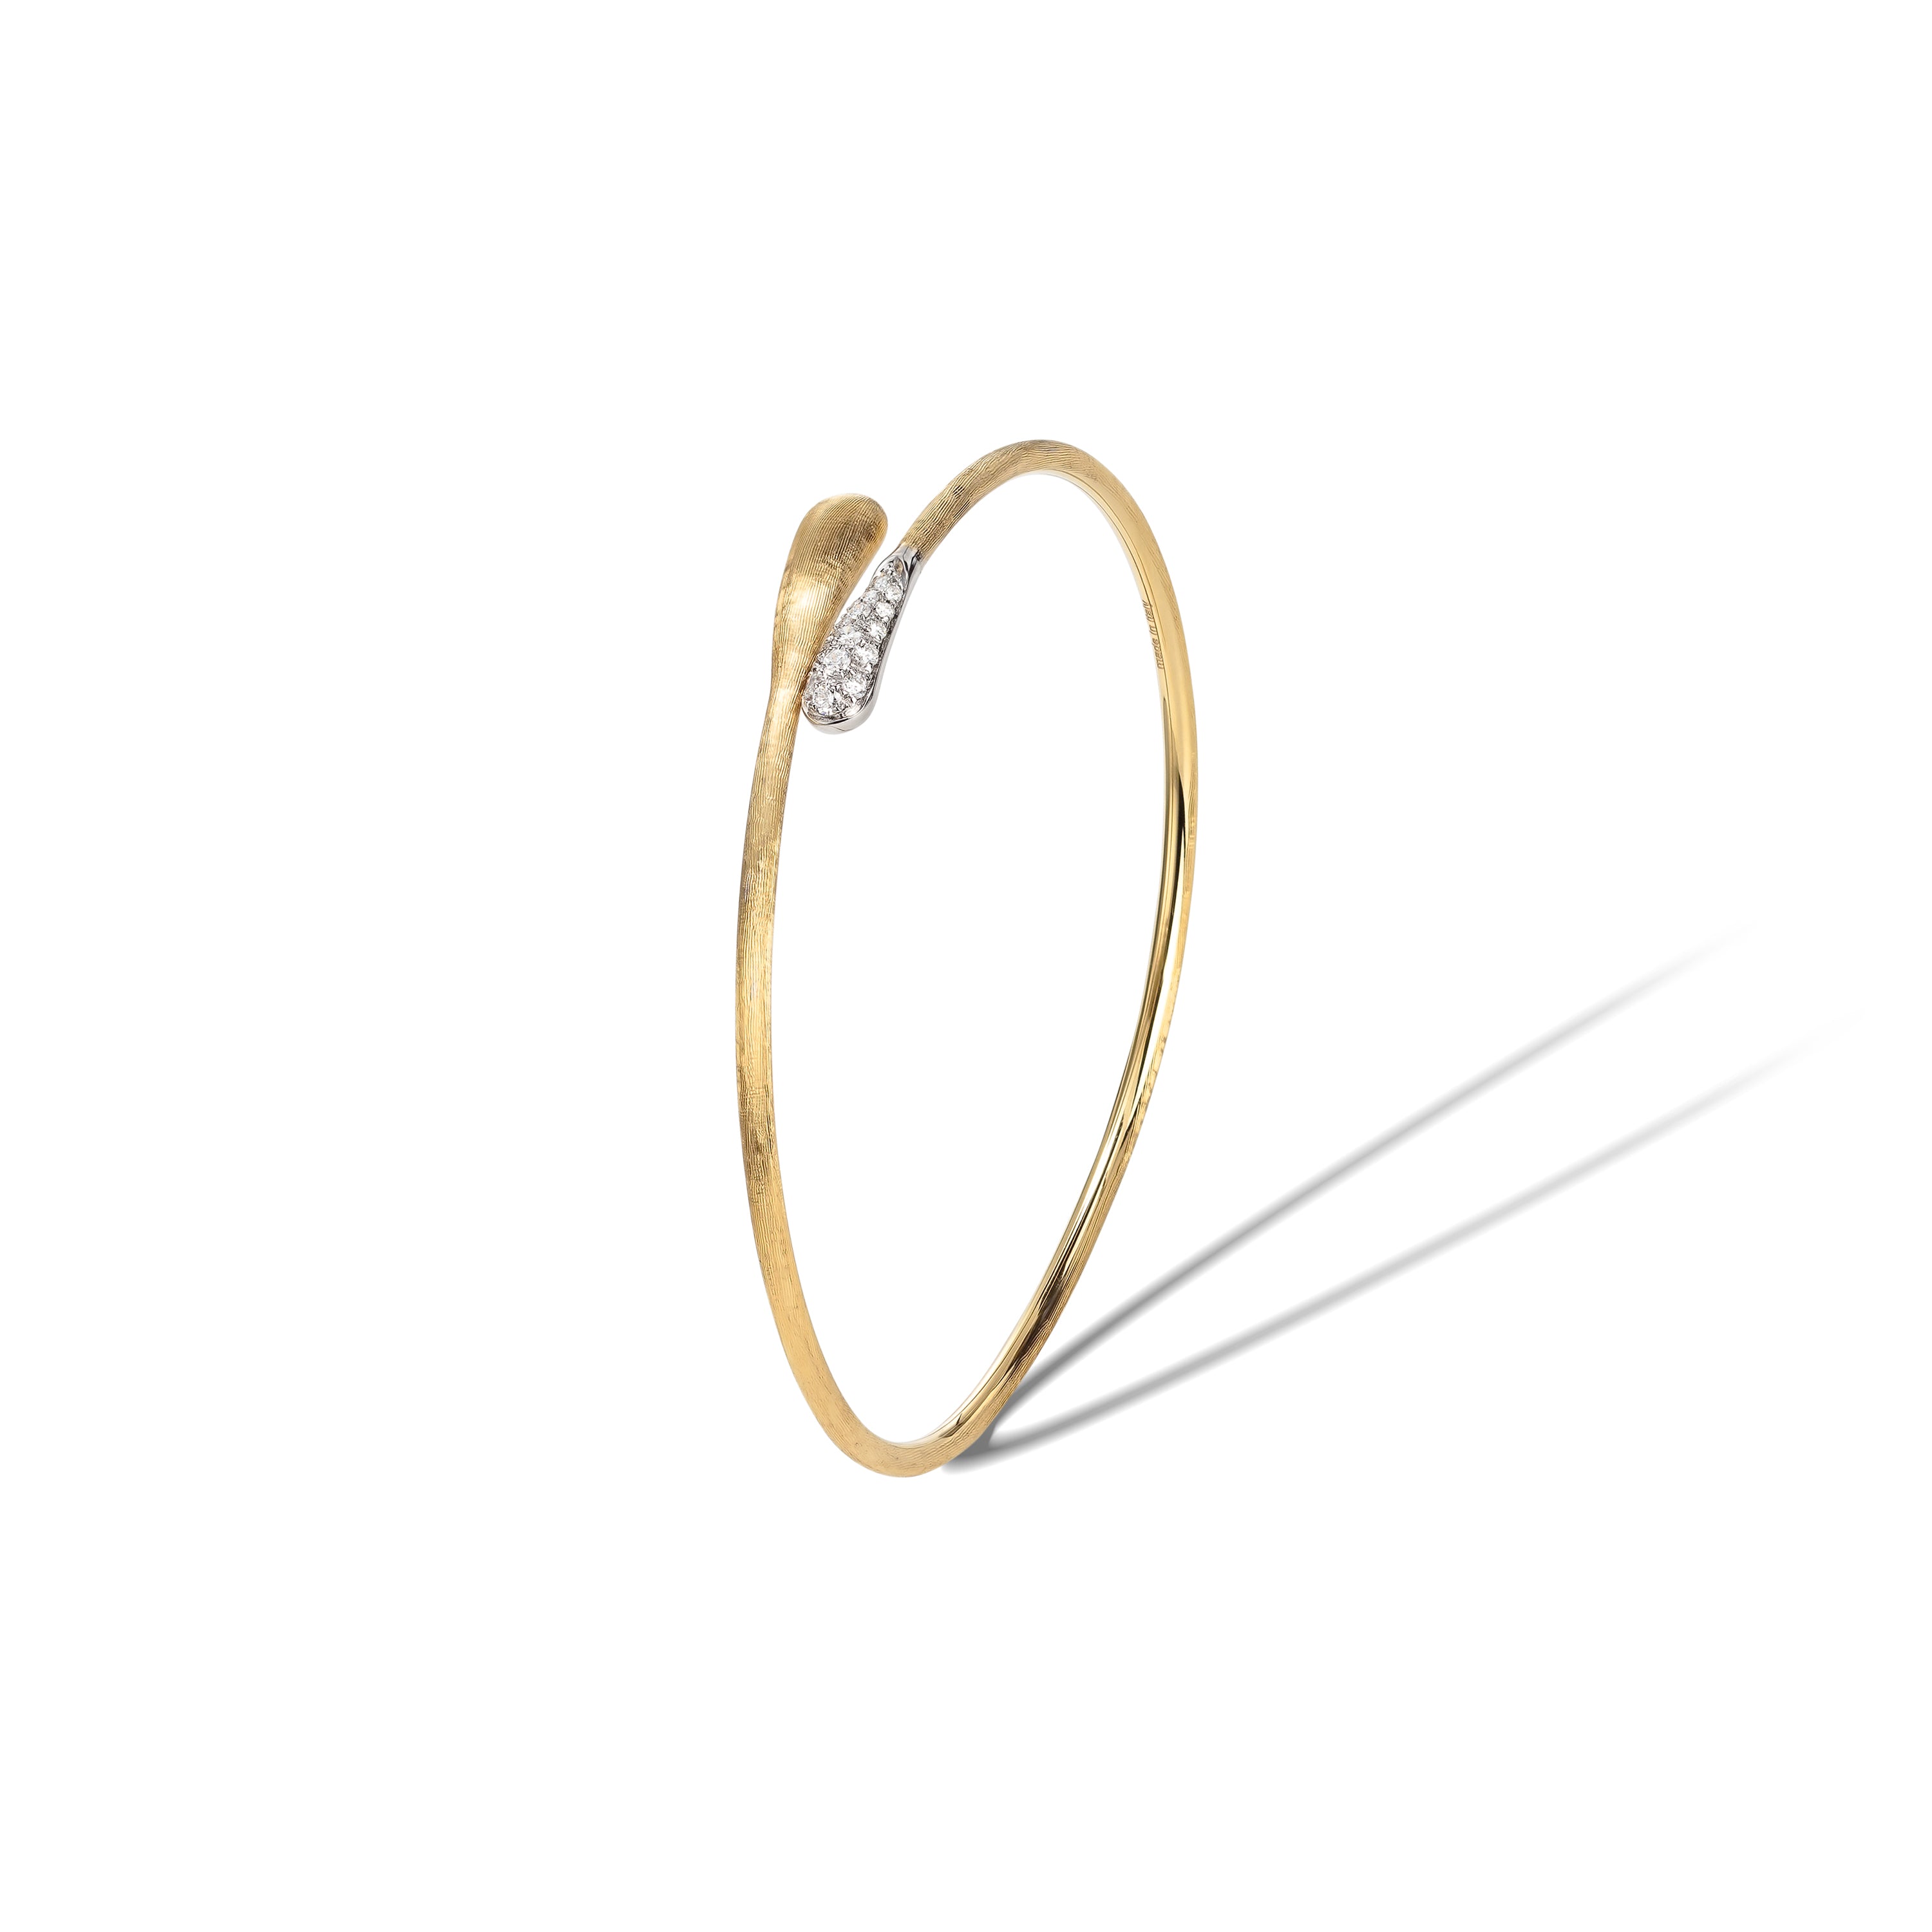 18K YELLOW GOLD AND DIAMOND HUGGING CUFF FROM THE LUCIA COLLECTION